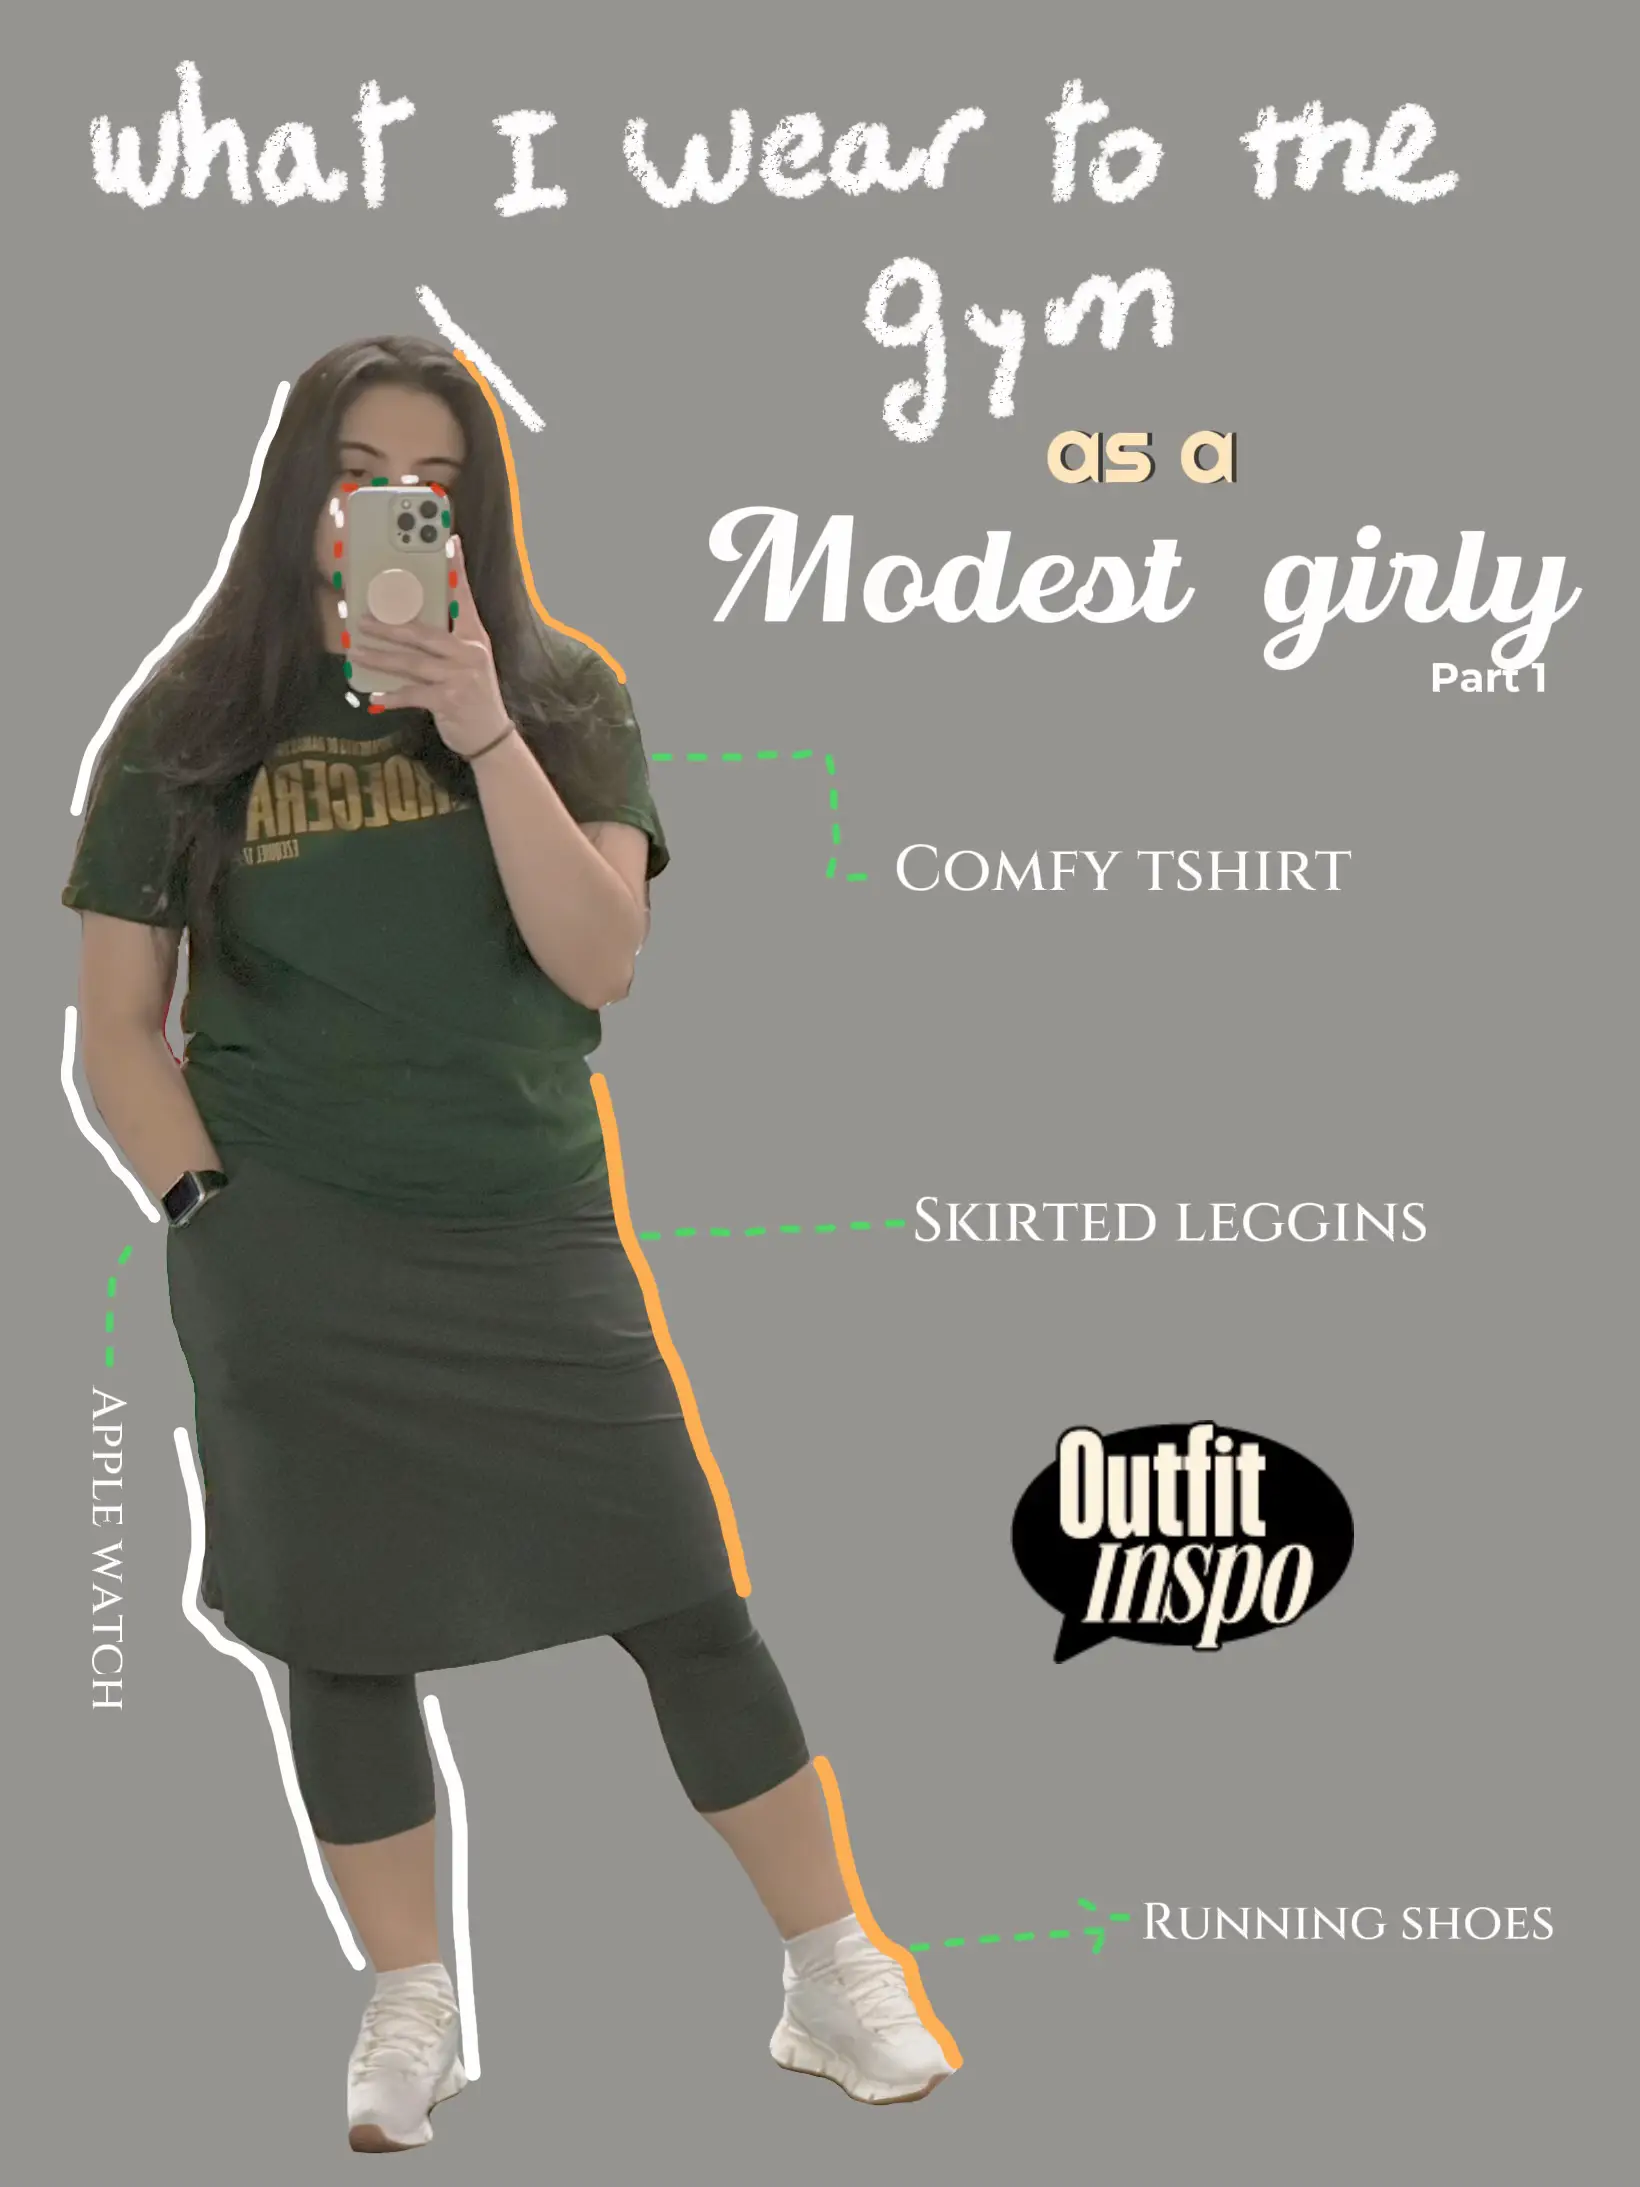 ladies THIS is how you should dress at the gym… #modesty